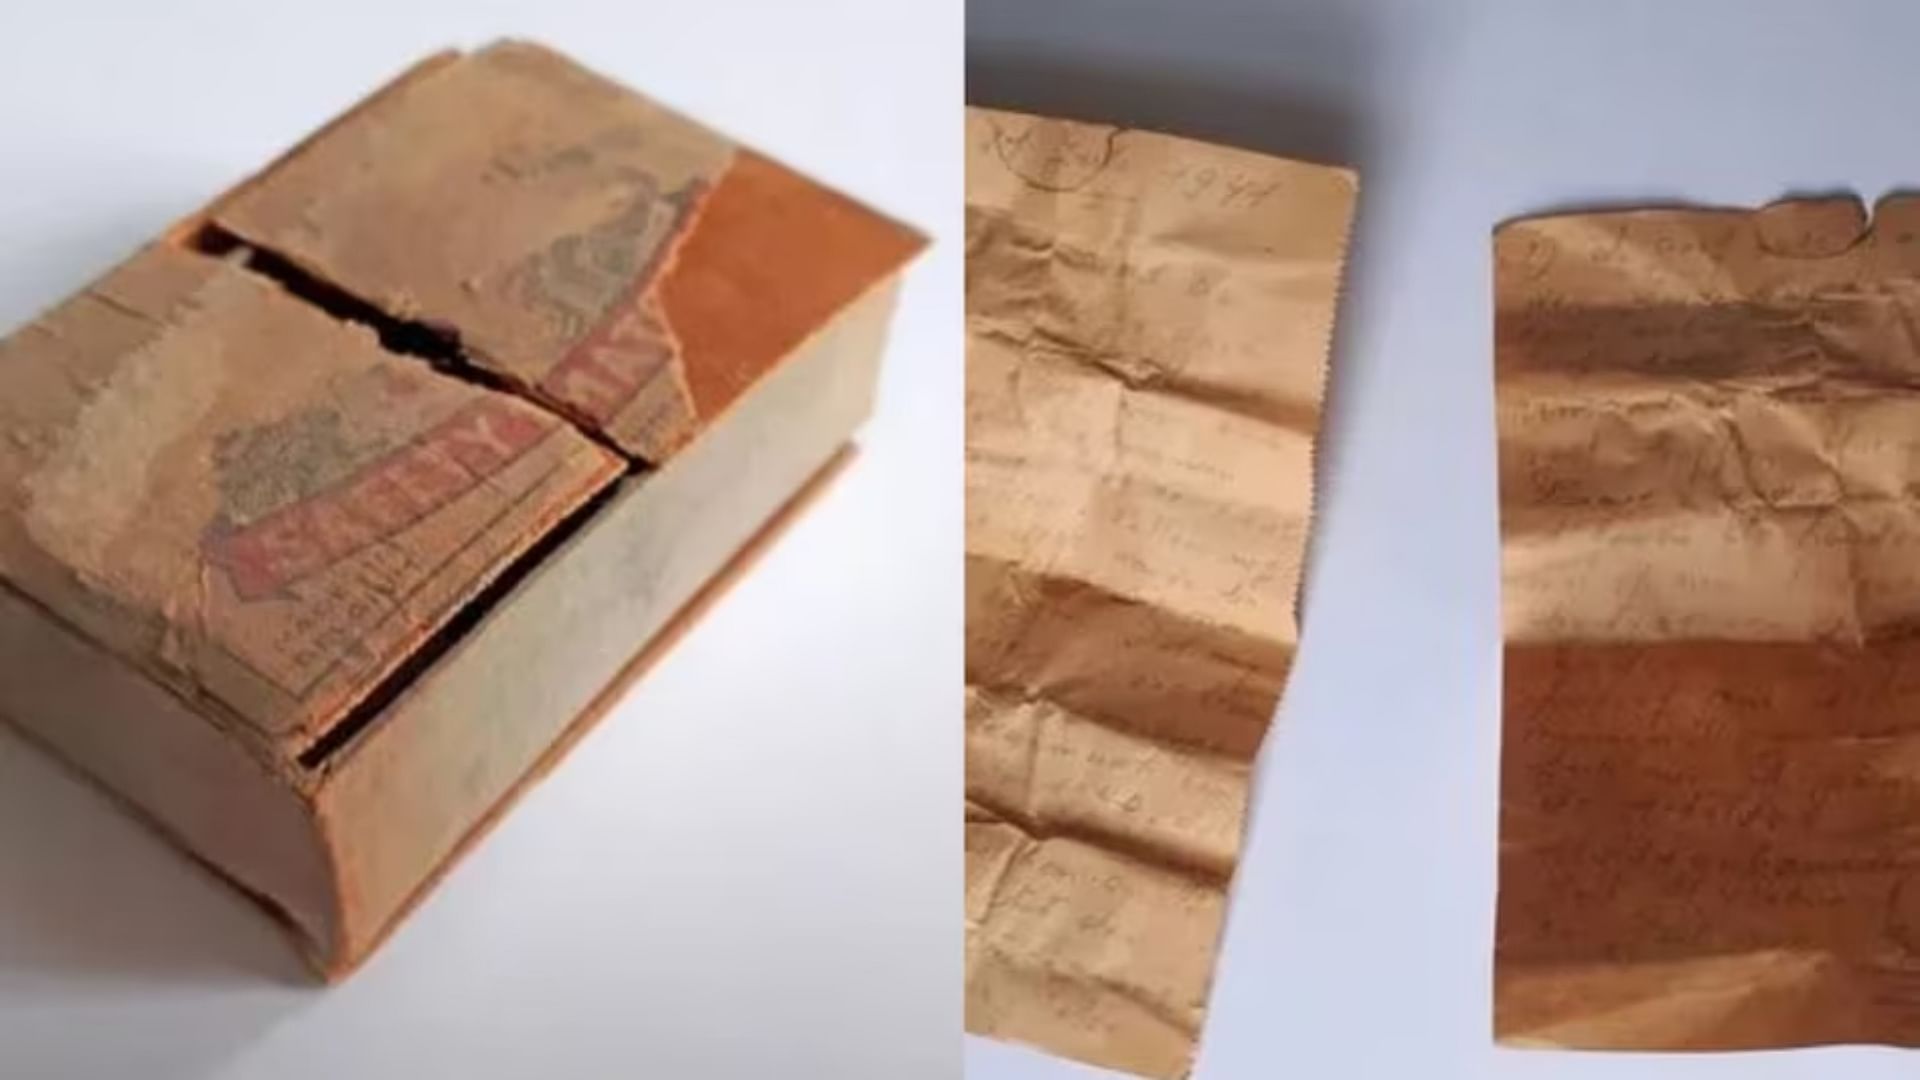 Viral News: Builder discovers note from 1941 hidden in roof with advice for future generations